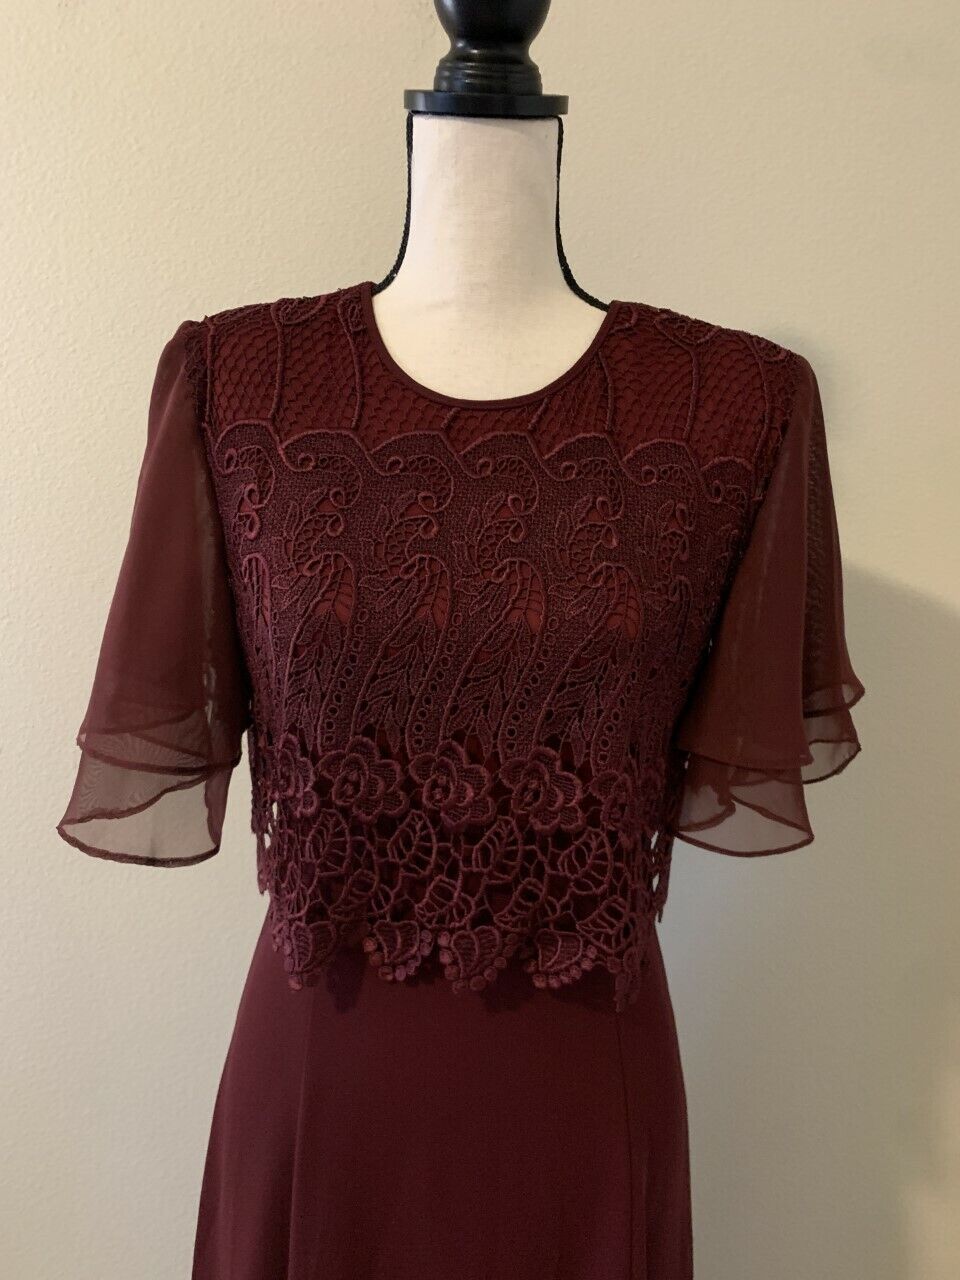 PETER FASHION Women Size M Red Top Floral Lace Sh… - image 2